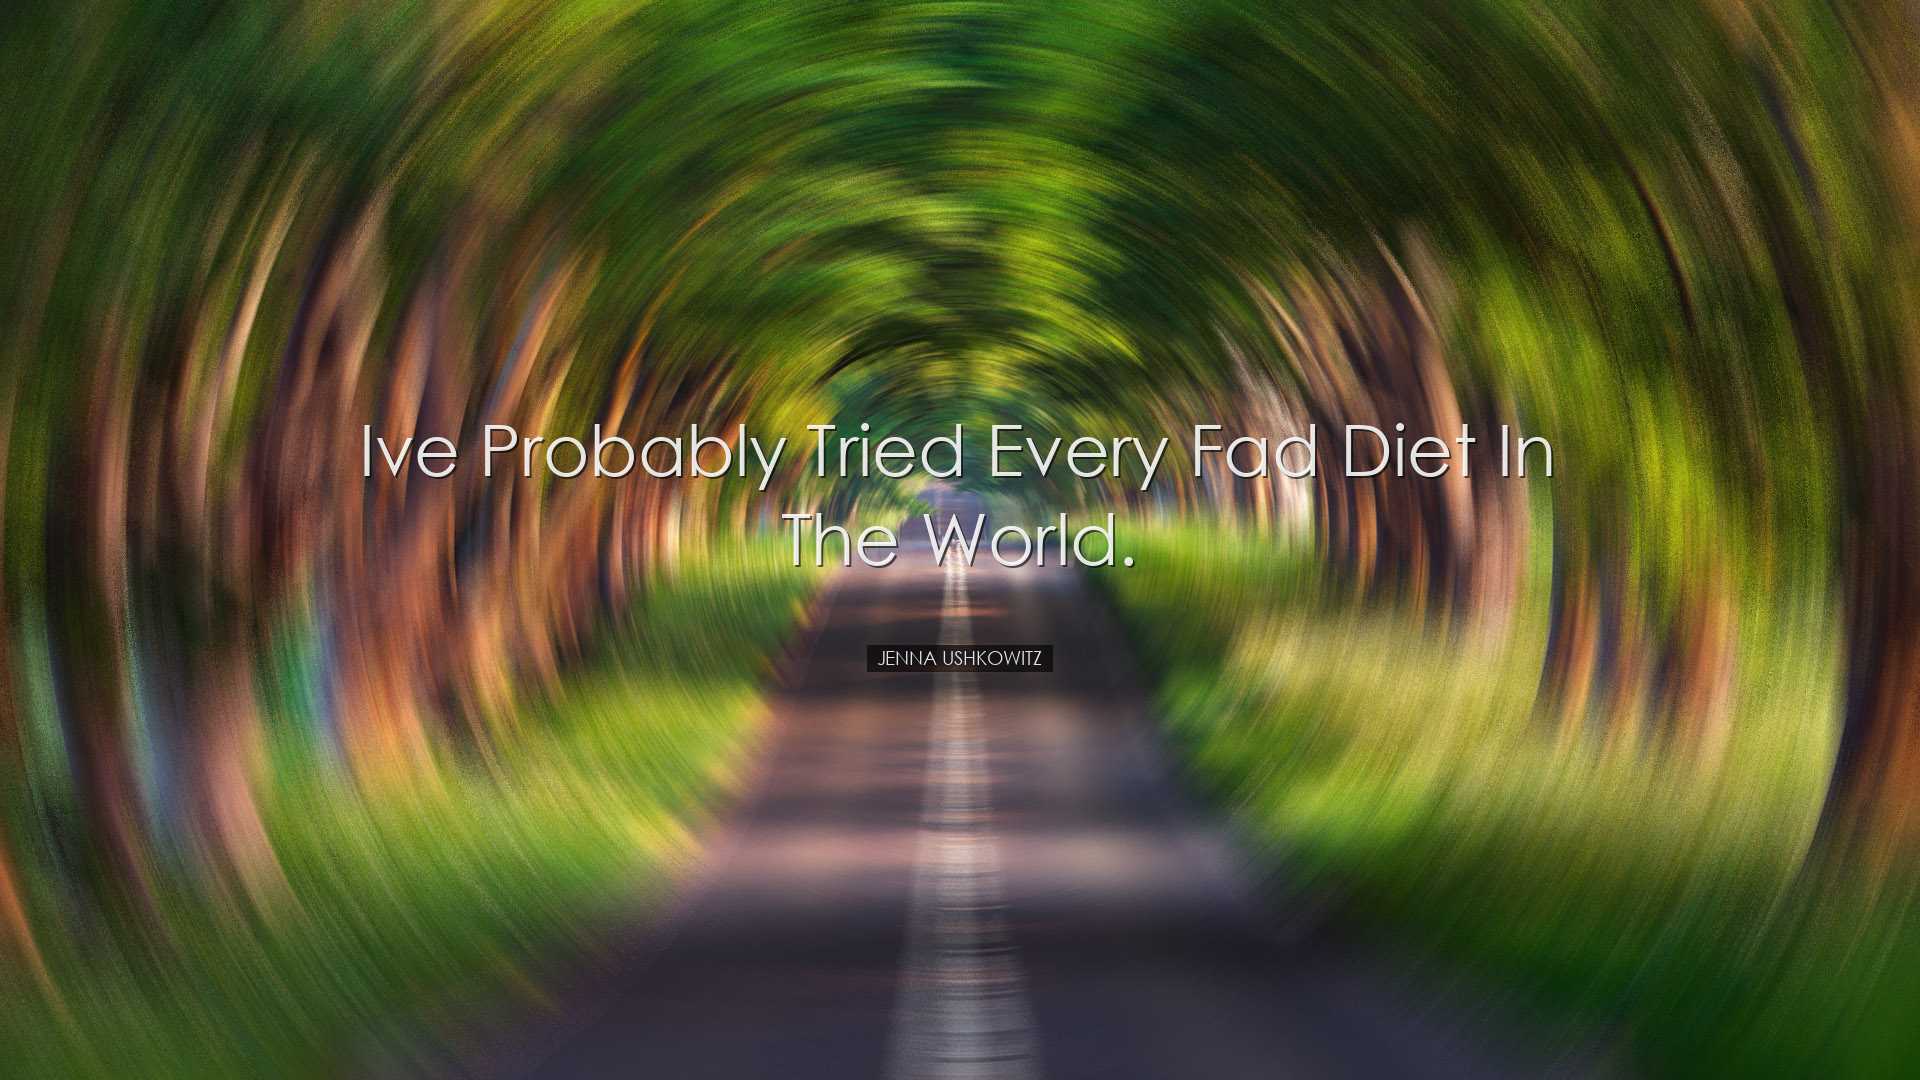 Ive probably tried every fad diet in the world. - Jenna Ushkowitz